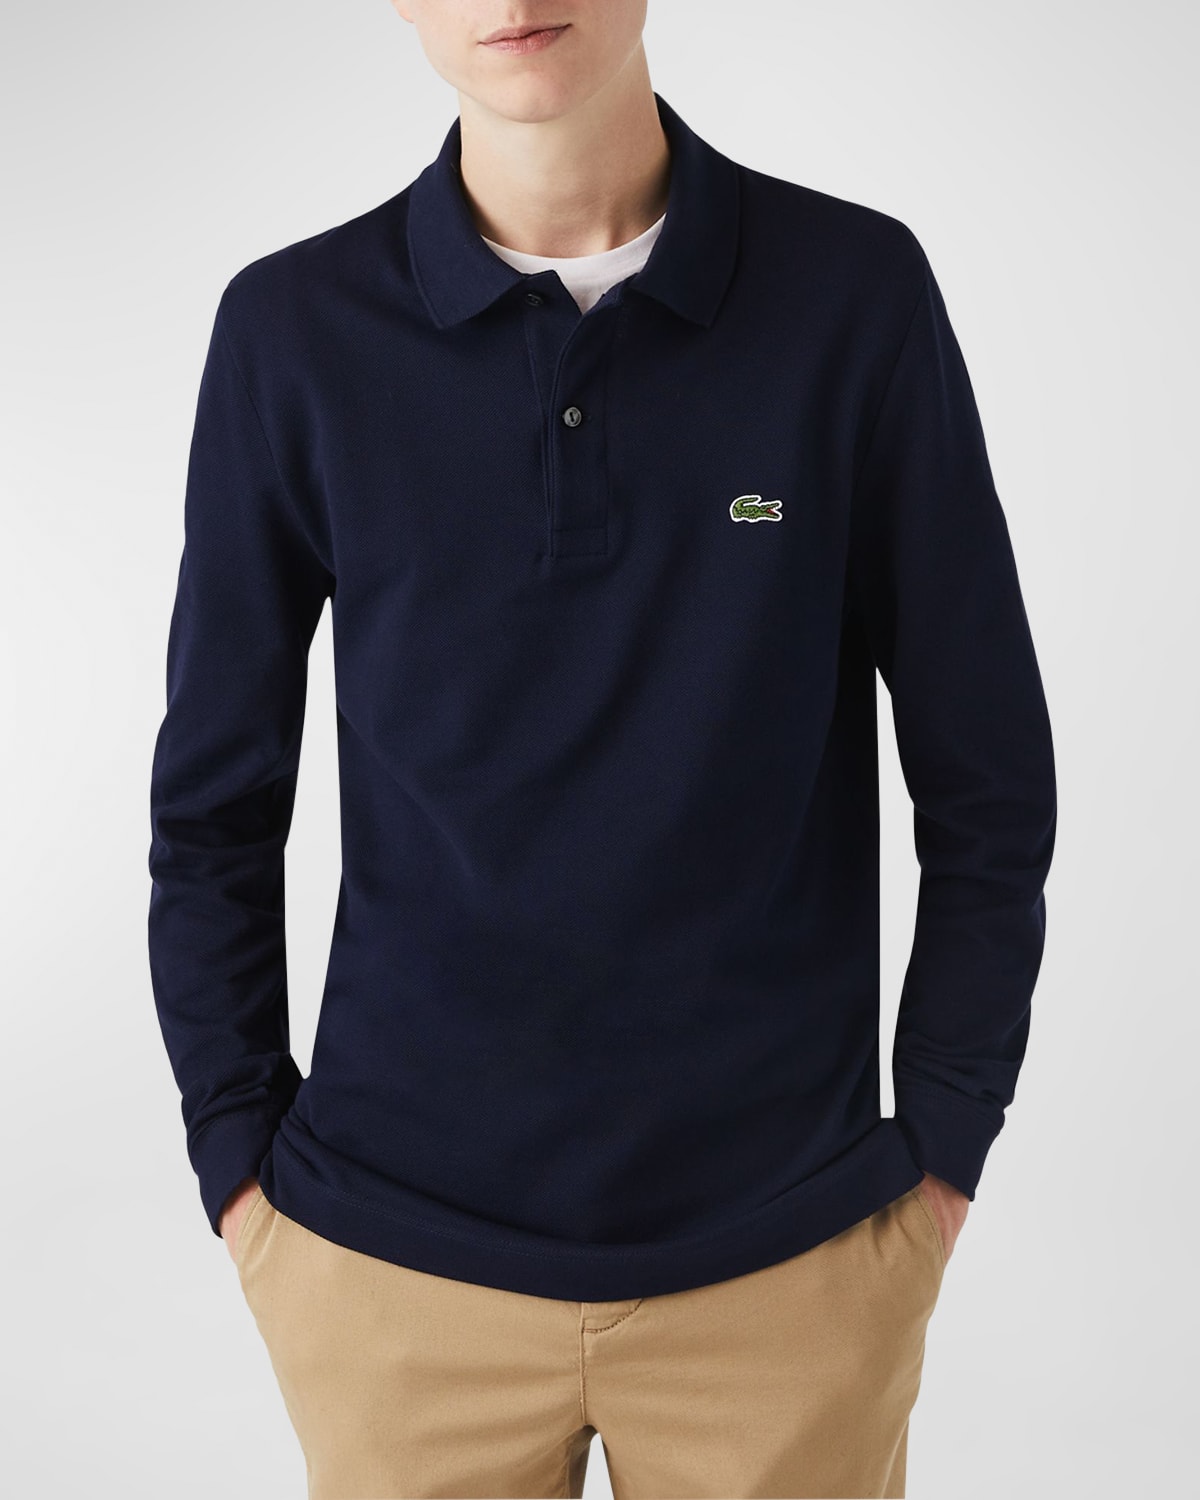 Lacoste Original L.12.12 Mens Long Sleeve Cotton Polo Shirt In Navy Blue 166